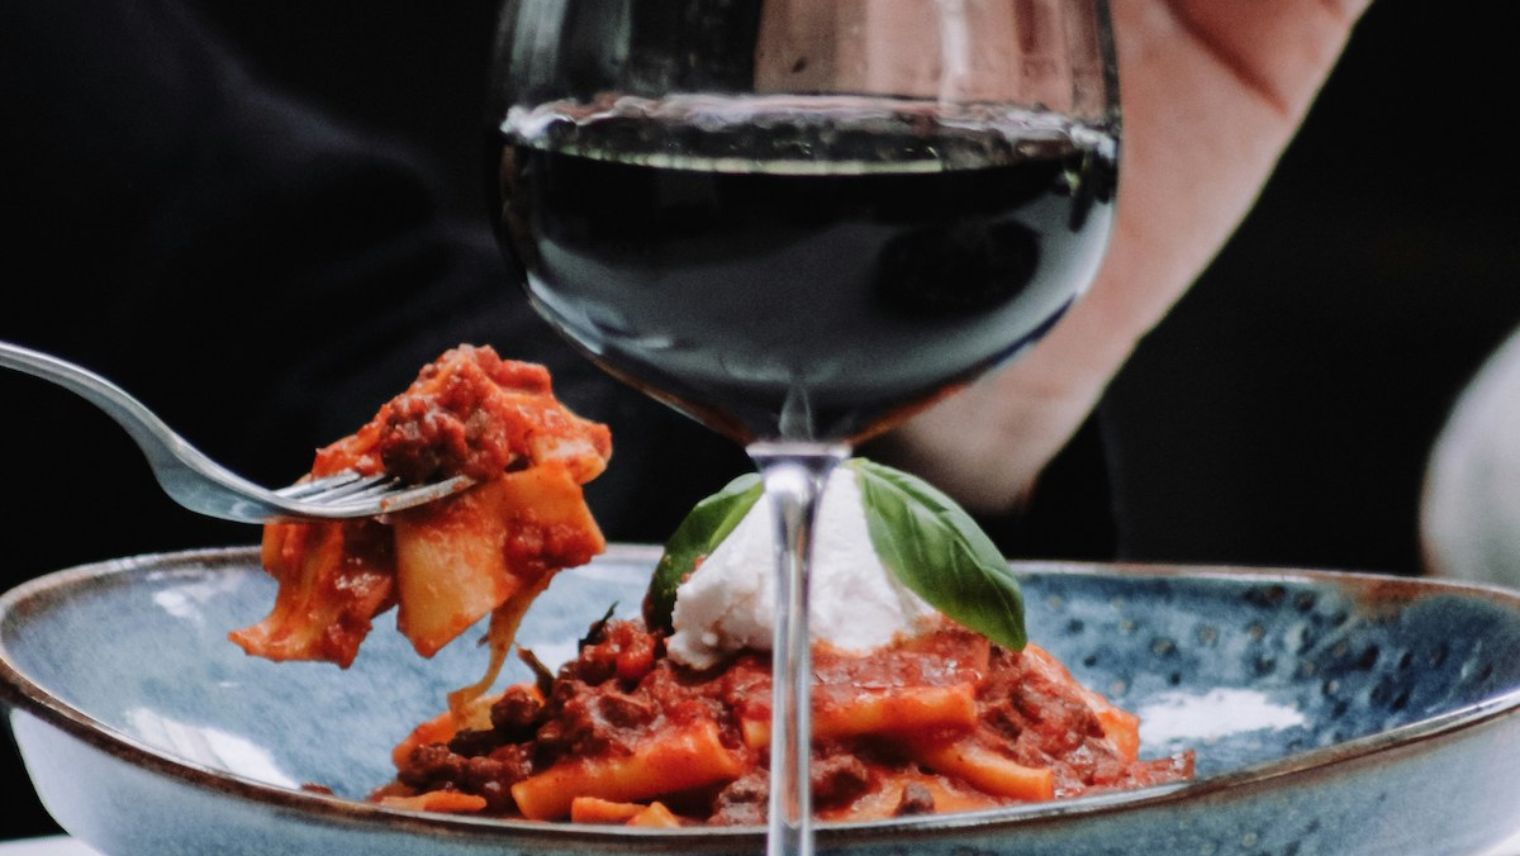 Feast on delicious Italian food at Cafe Murano